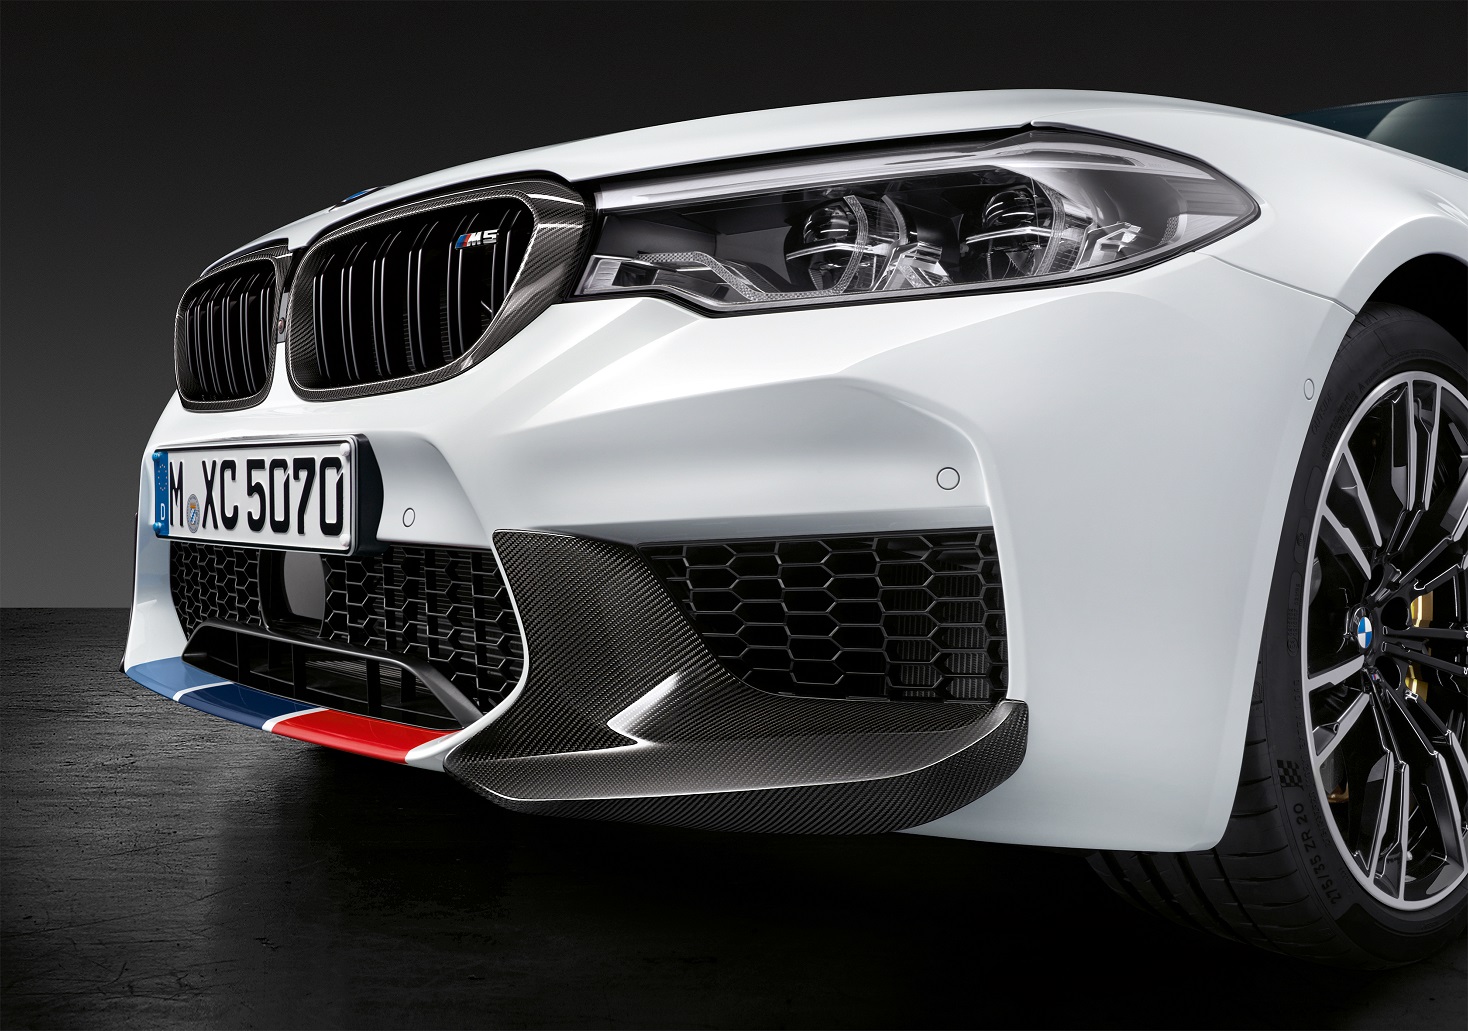 bmw-m-performance-parts-for-f10-m5-lci-now-available-photo-gallery.jpg